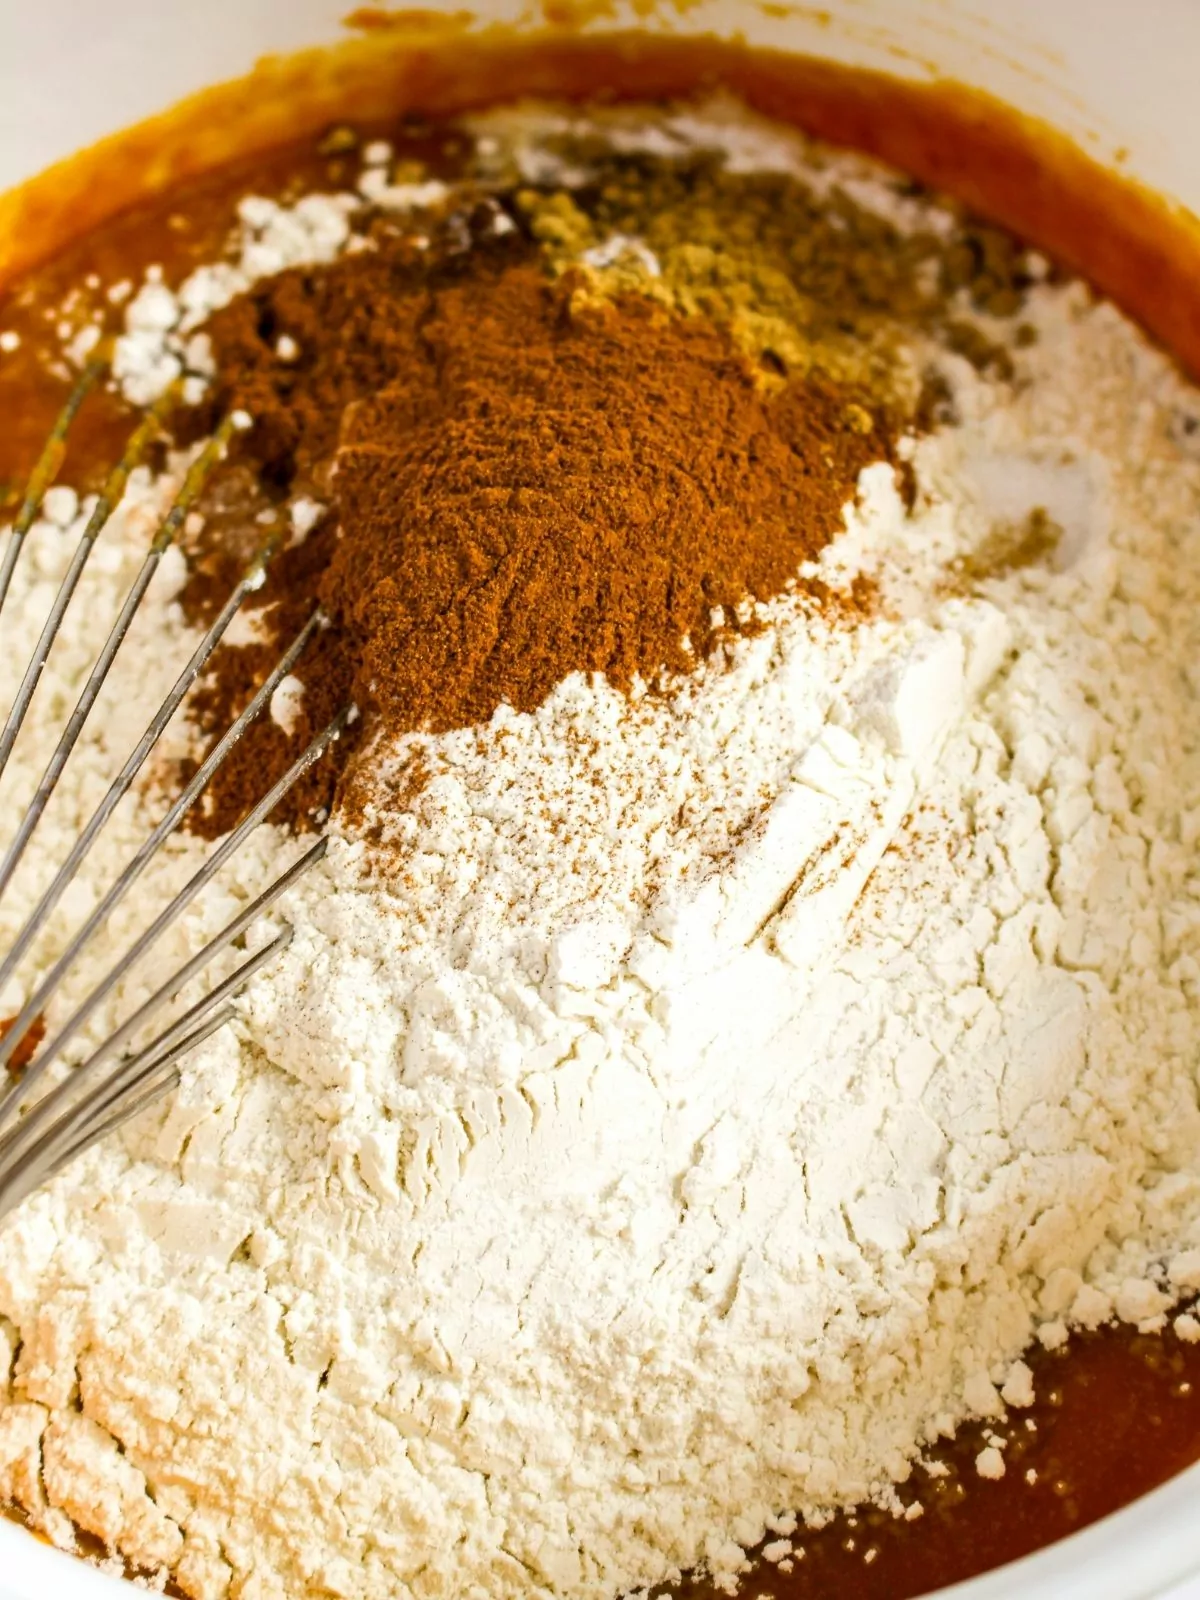 Dry ingredients for spice cake..